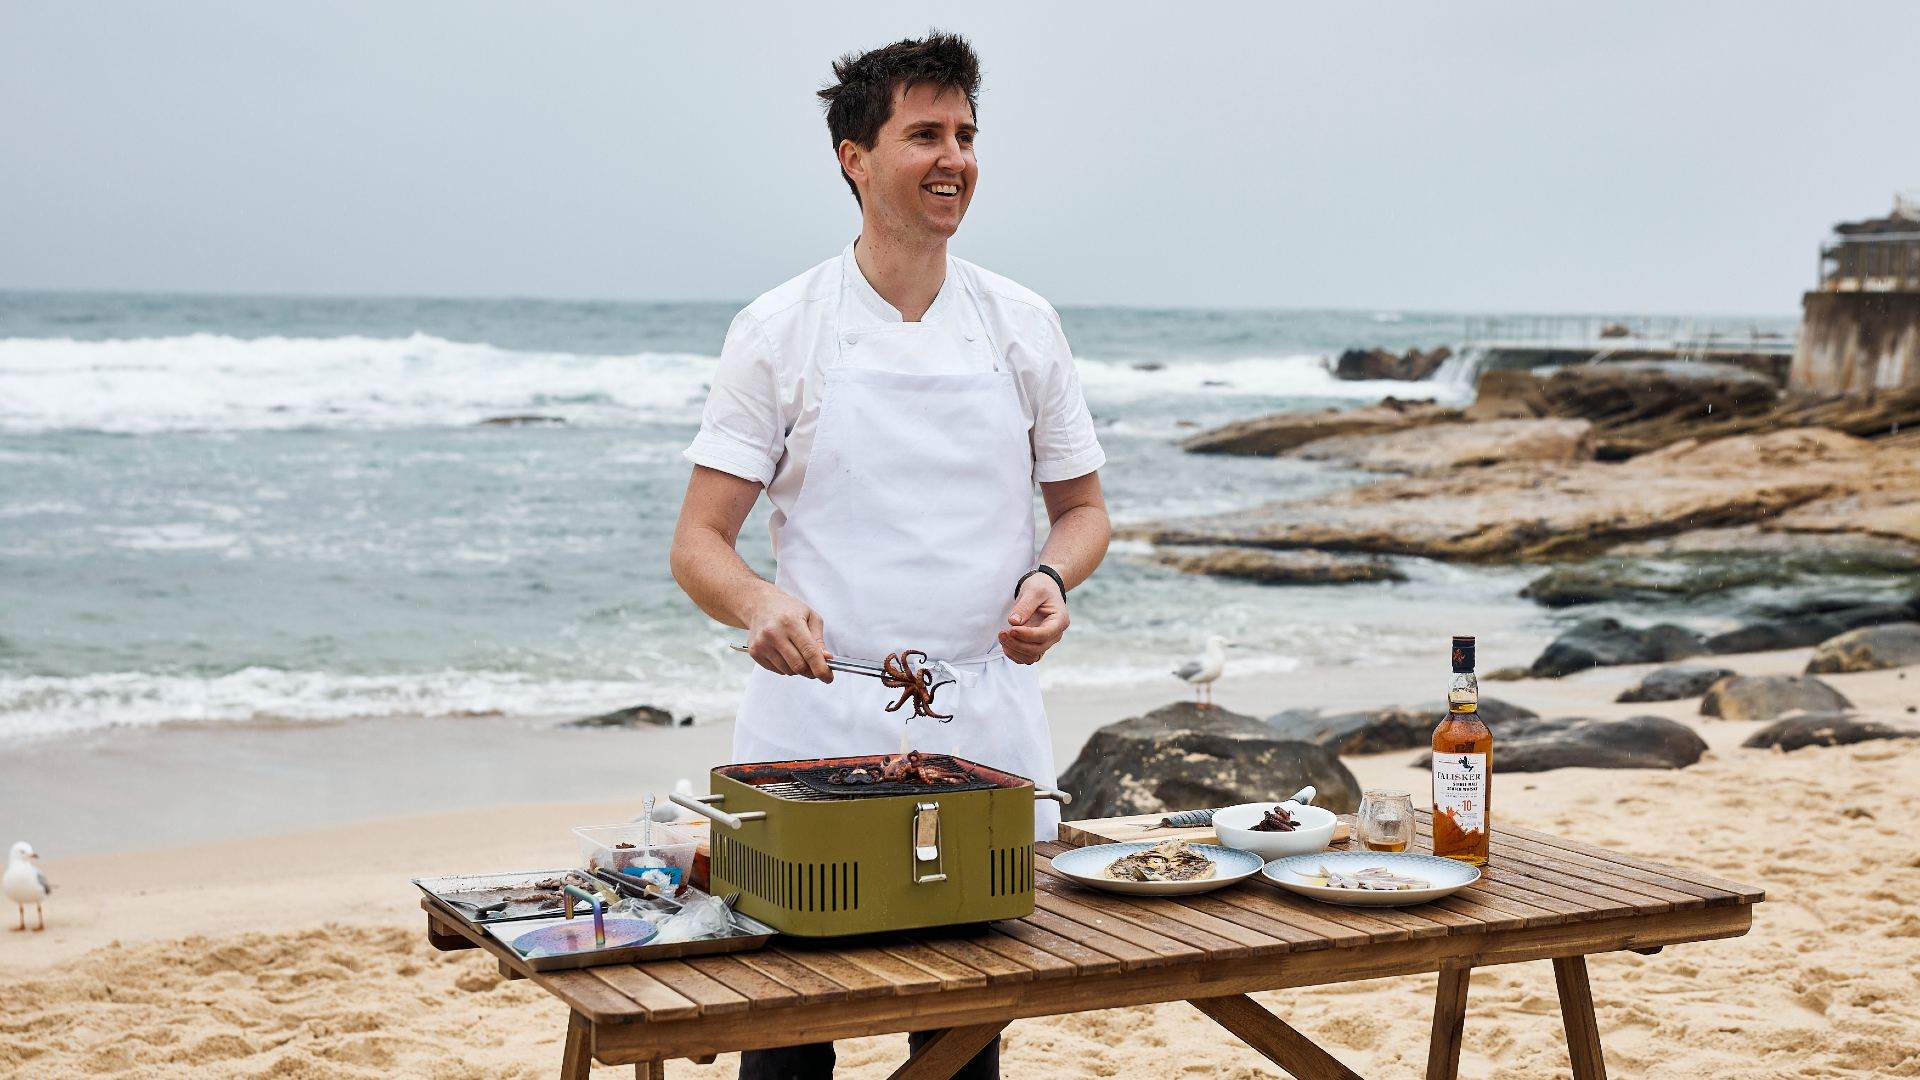 Saint Peter's Josh Niland Is Hosting a Two-Day Culinary Pop-Up Set Against the North Head Clifftops